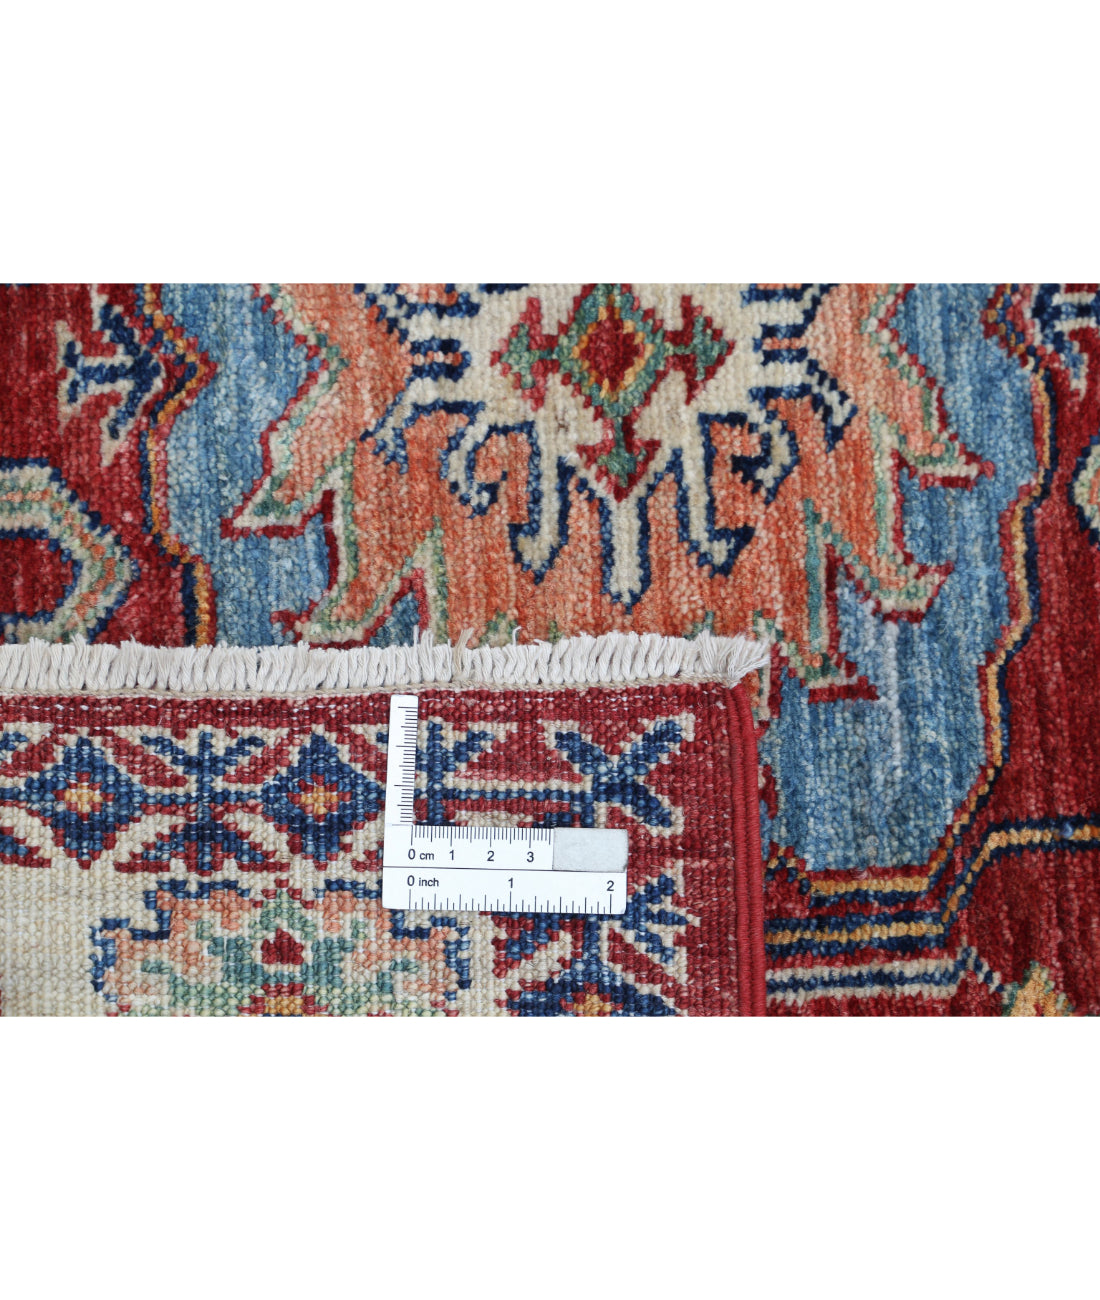 Hand Knotted Royal Kazak Wool Rug - 3'4'' x 4'9'' 3'4'' x 4'9'' (100 X 143) / Red / Ivory